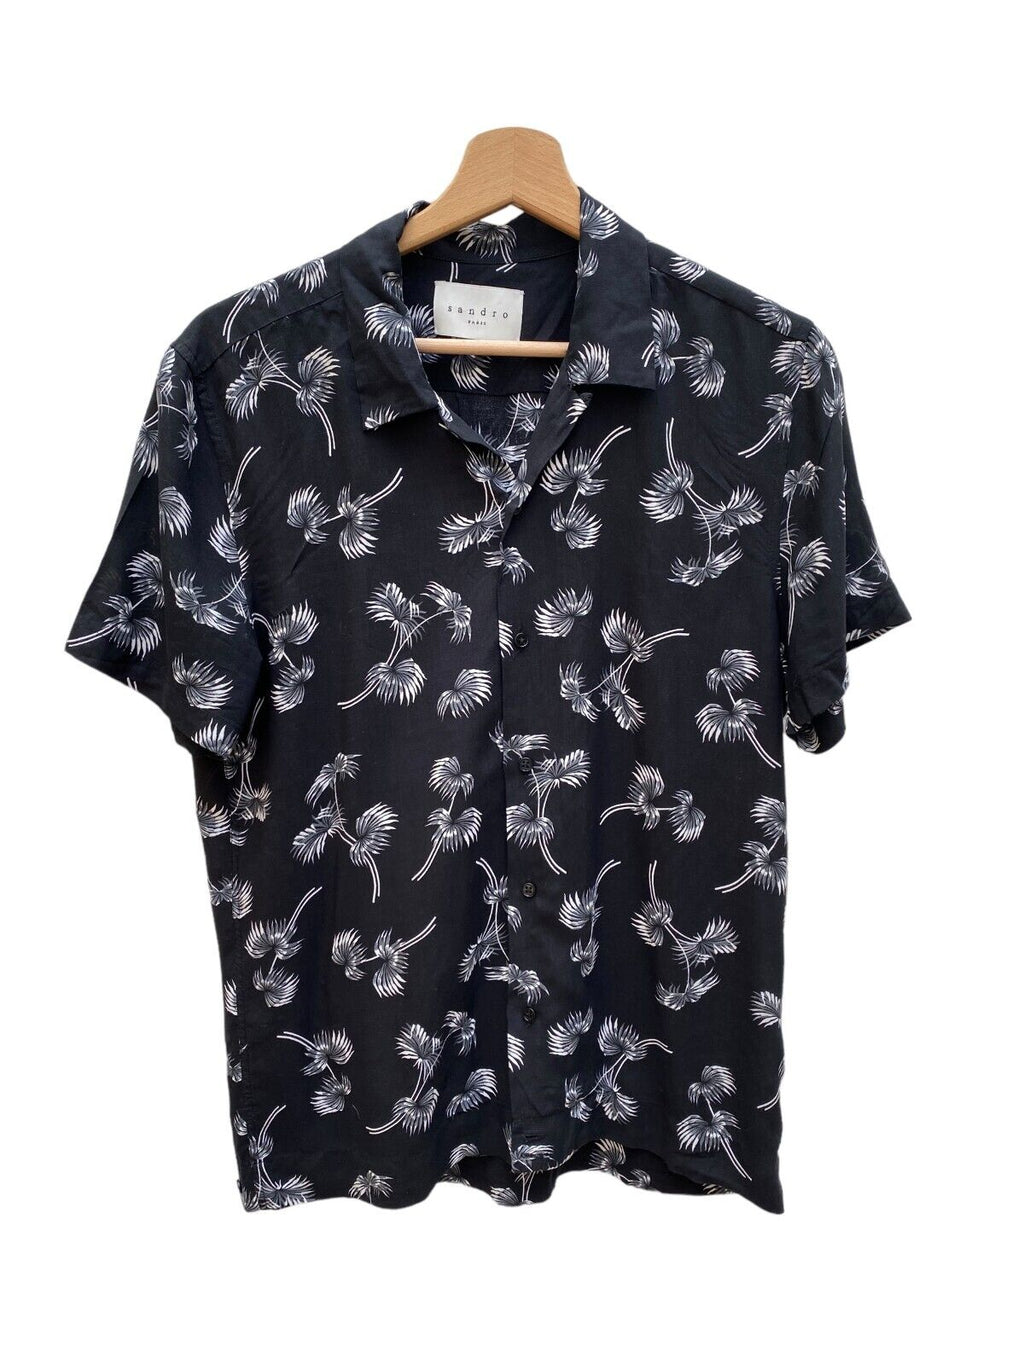 Black Hawaiian Short Sleeves Shirt  Bowling Fit Size L fits S to M